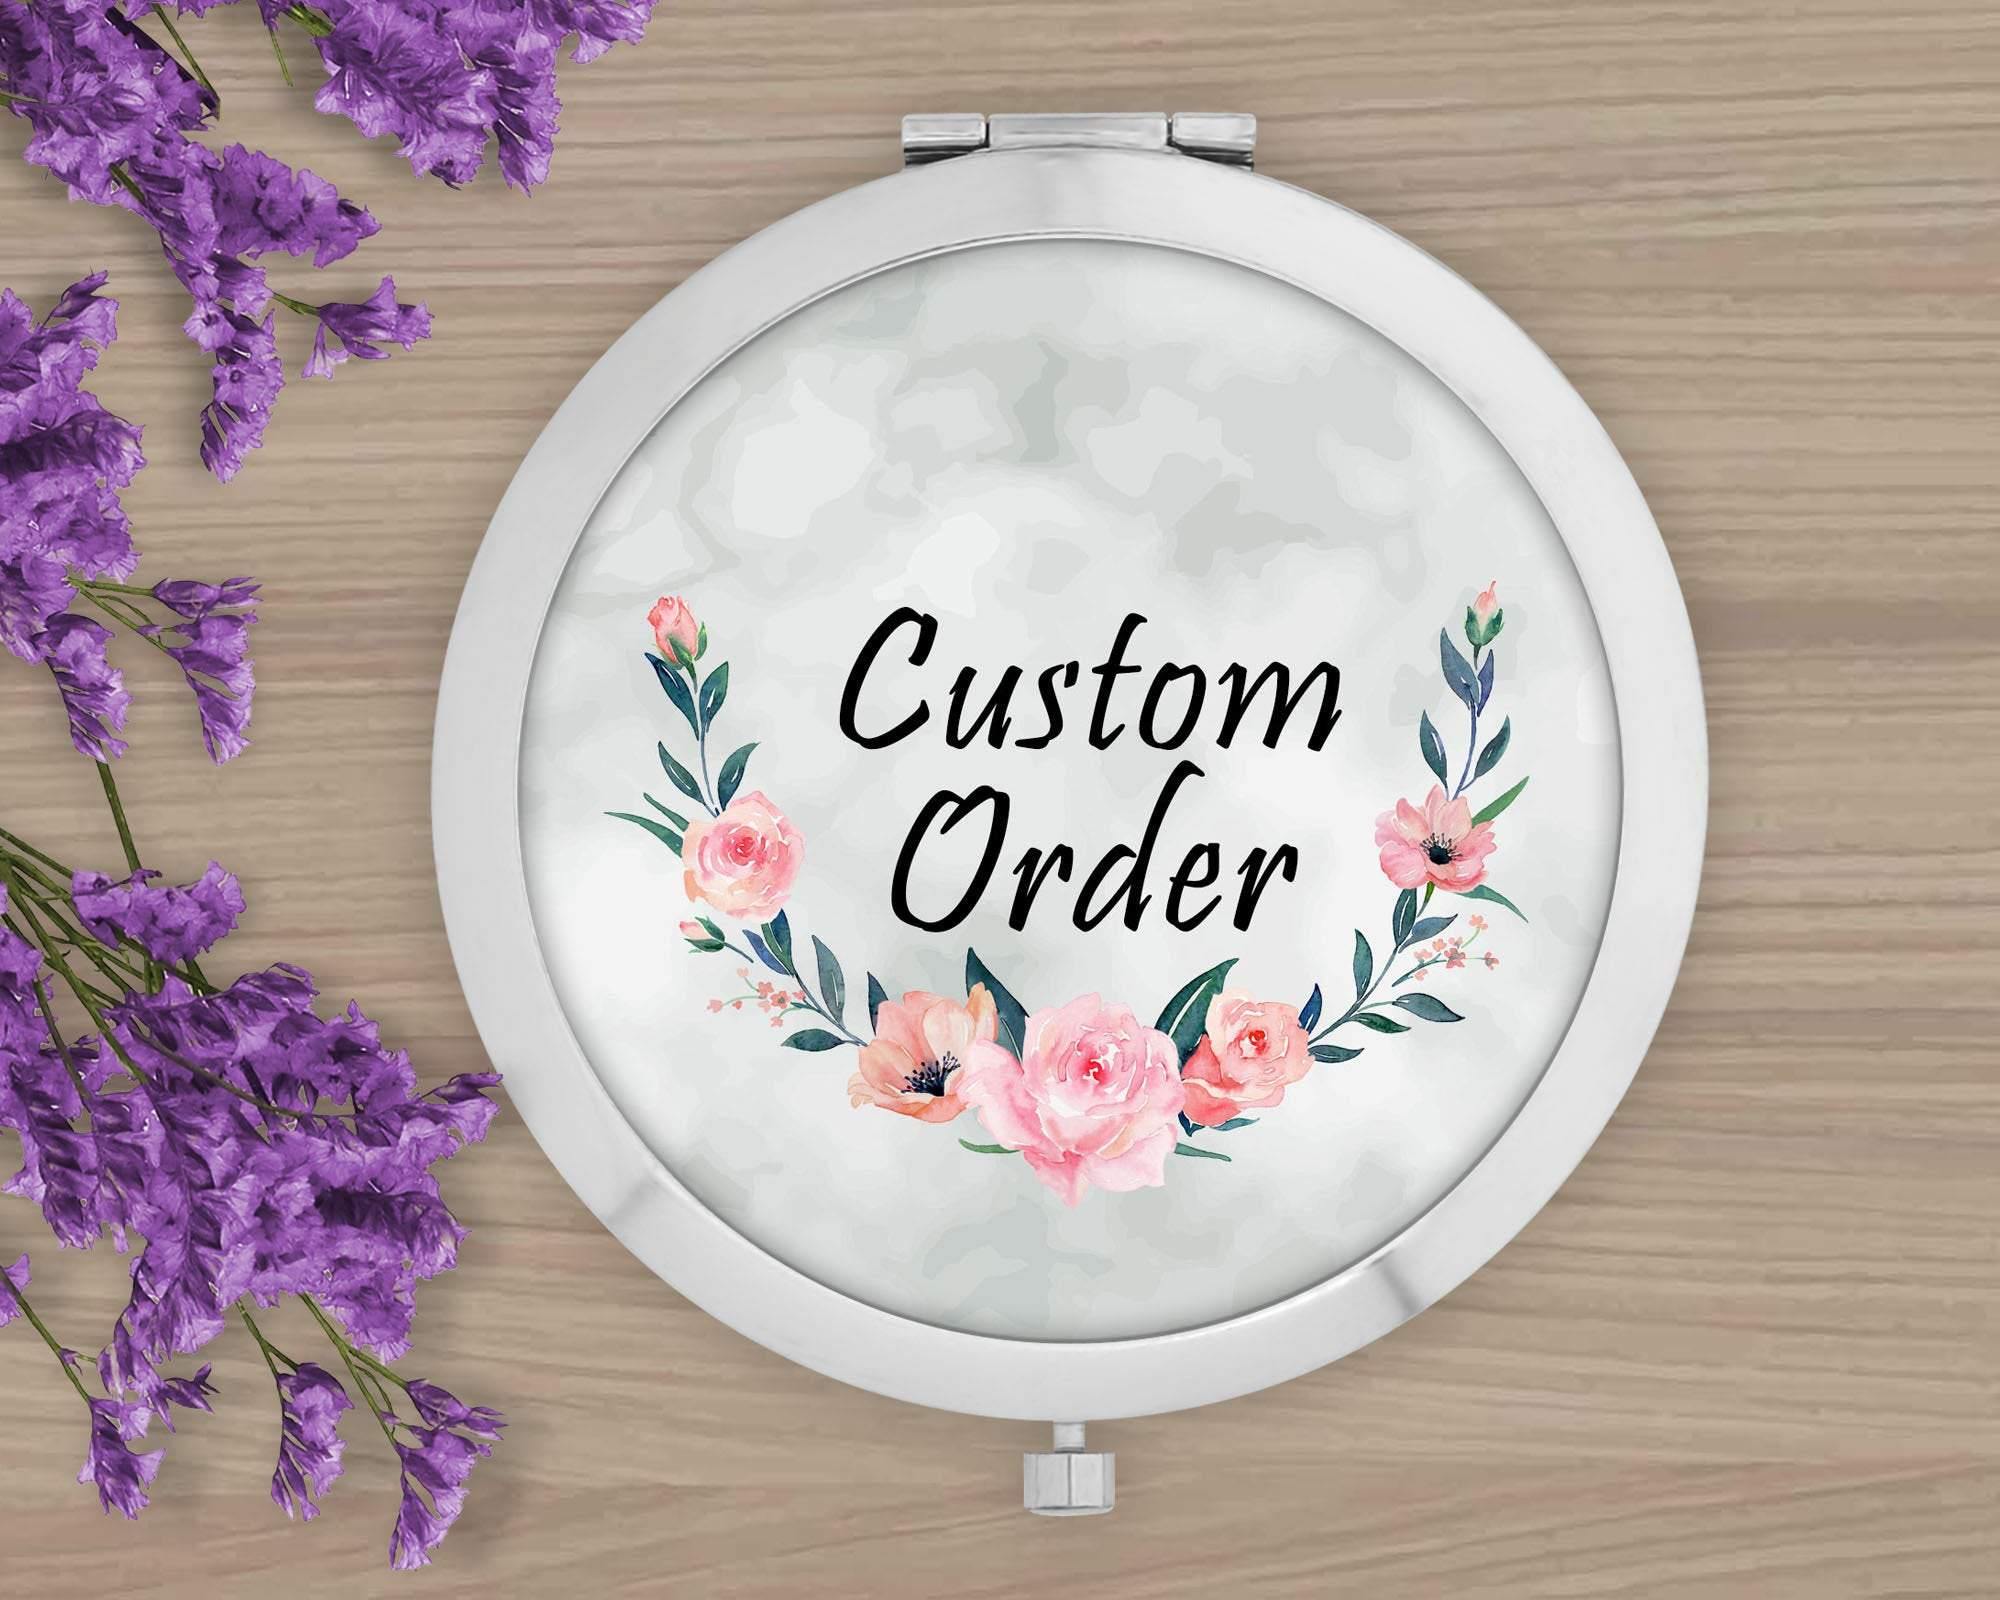 Personalized Compacts | Custom Compacts | Makeup & Cosmetics | Custom Order - This & That Solutions - Personalized Compacts | Custom Compacts | Makeup & Cosmetics | Custom Order - Personalized Gifts & Custom Home Decor